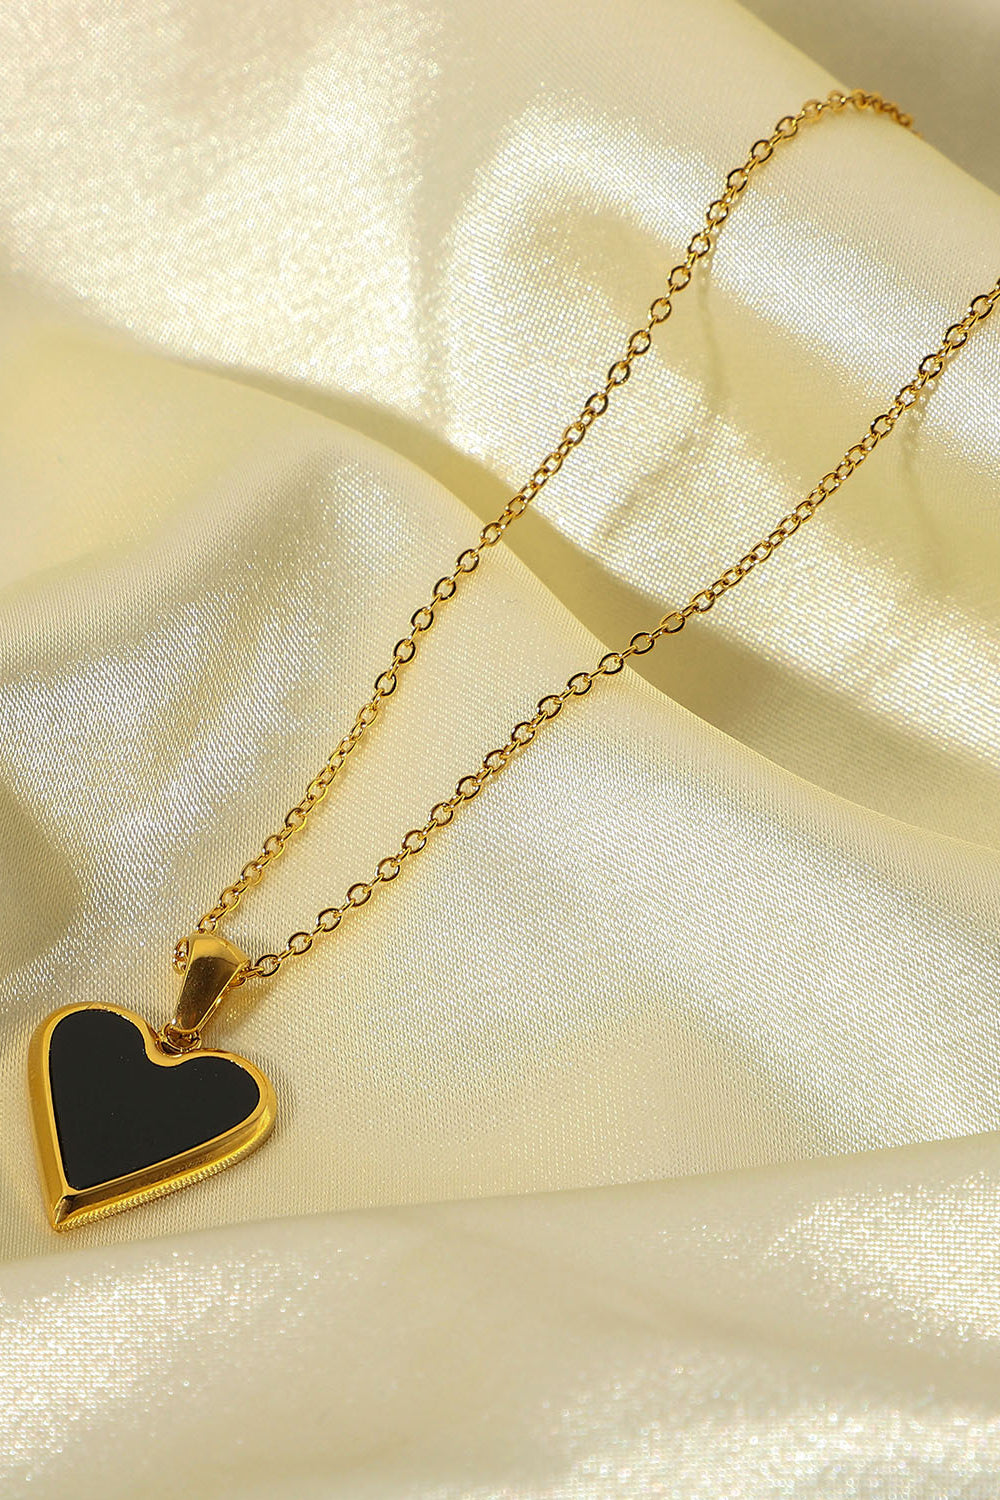 Bordered Heart Chain Necklace Bordered Heart Chain Necklace - M&R CORNER Trendsi Black / One Size